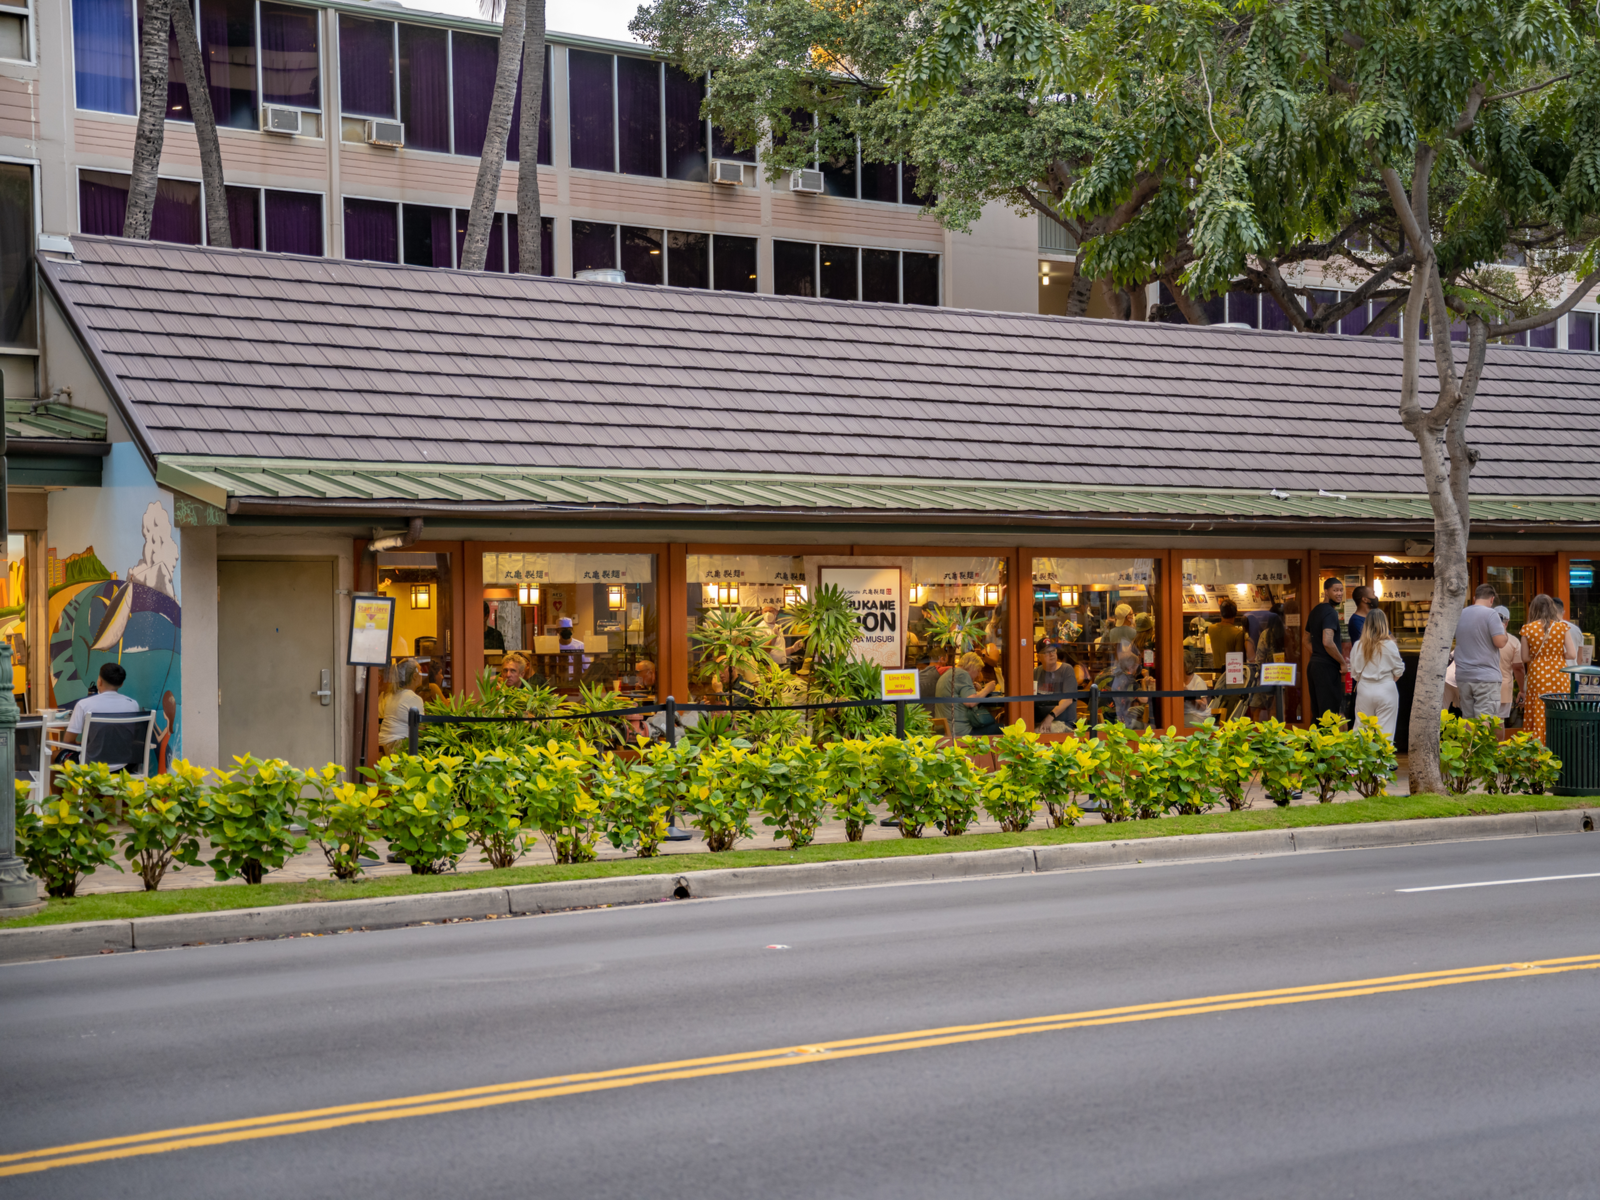 One of the best restaurants in Oahu, pictured in downtown Waikiki